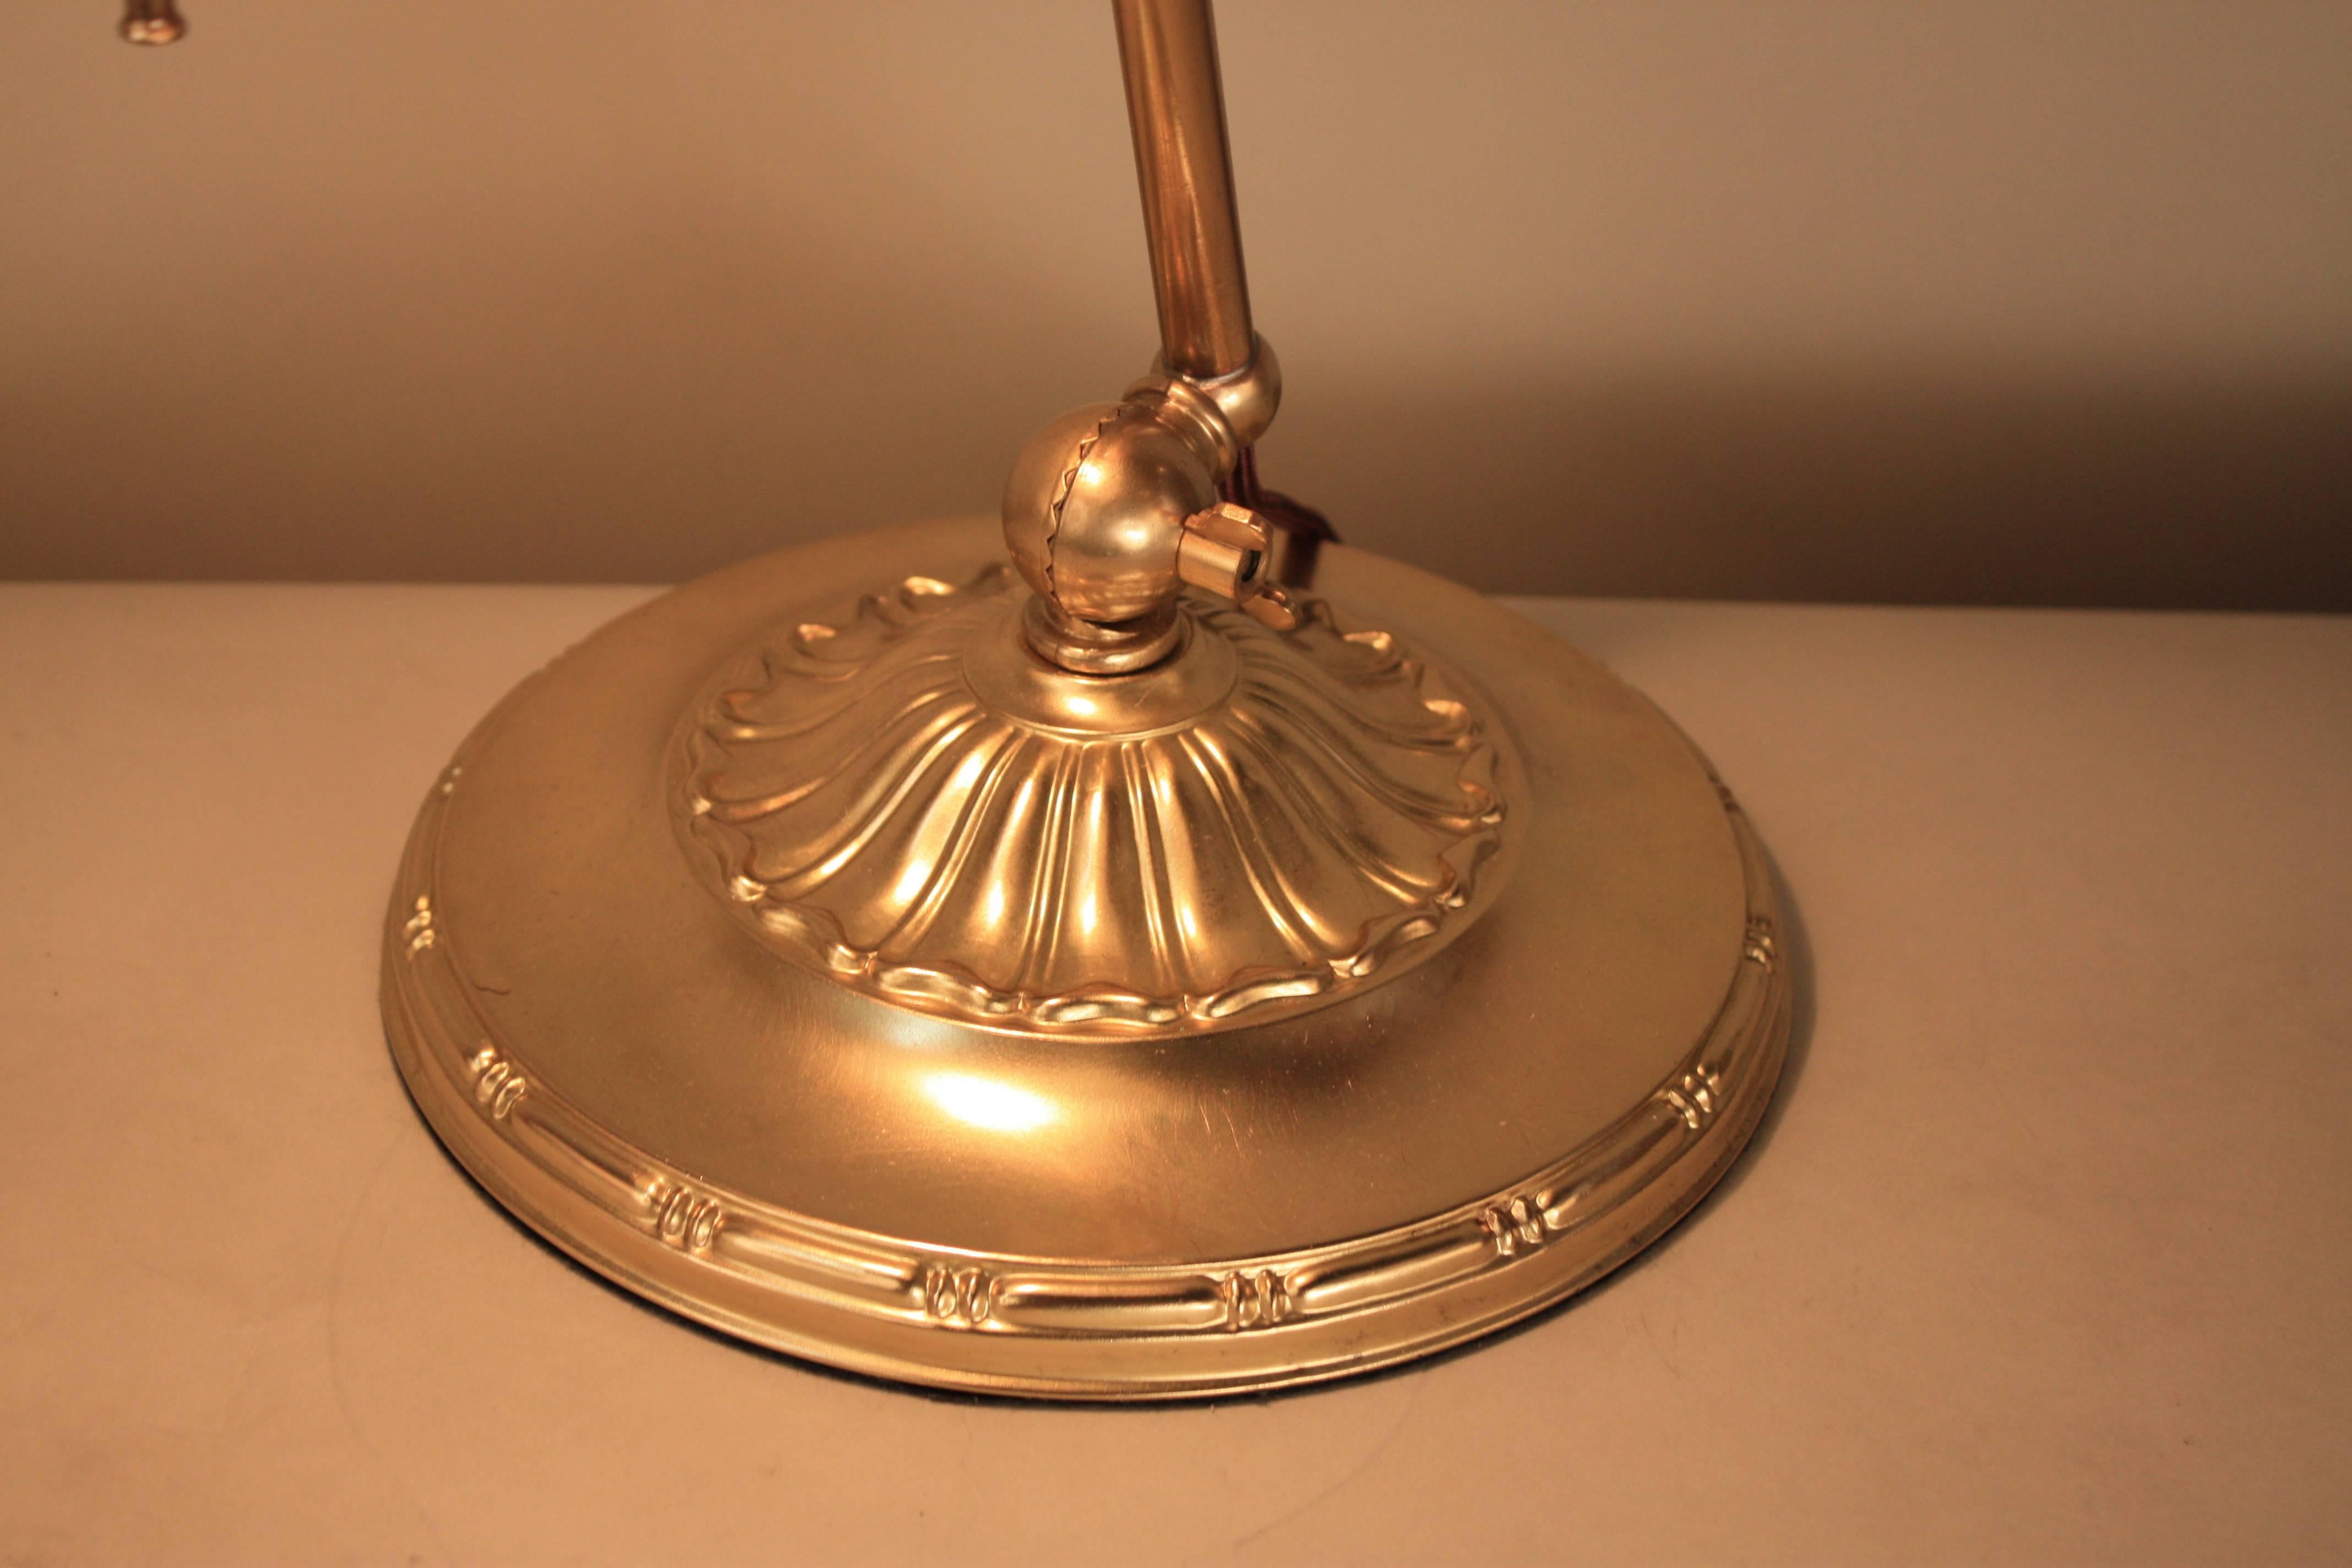 A Classic piece of Americana, this beautiful Emeralite desk lamp was originally made in 1916. This superb lamp features a beautiful brass base, a fabric covered cord. A versatile piece, the lamp is adjustable from the top and the base.